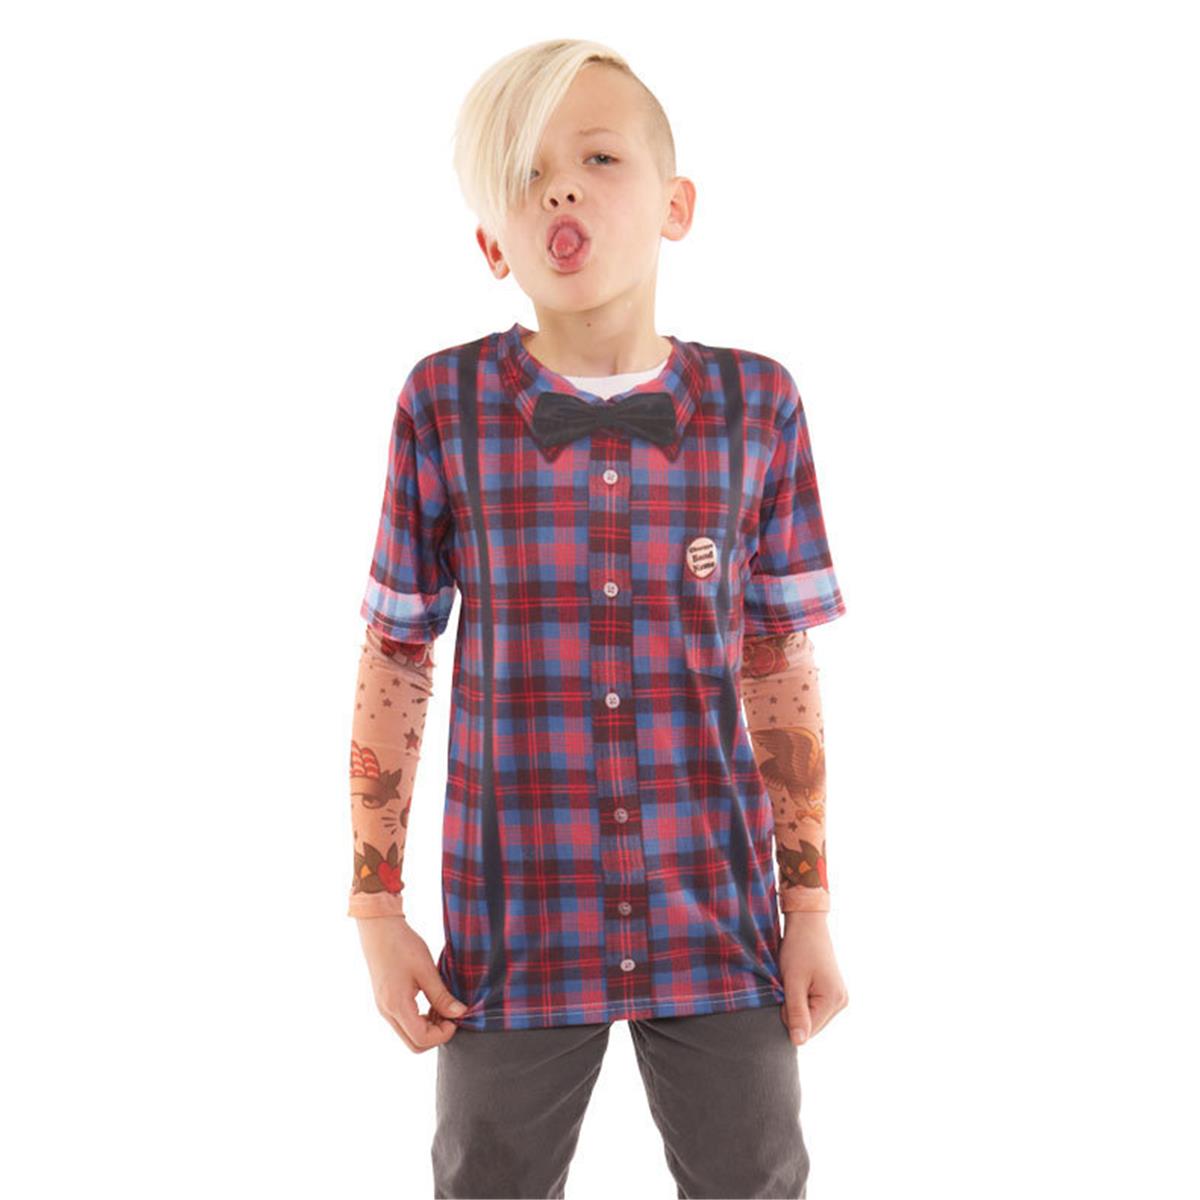 F134202-l Youth Hipster Bow Tie & Suspenders Tattoo Tee With Mesh Sleeves - Large